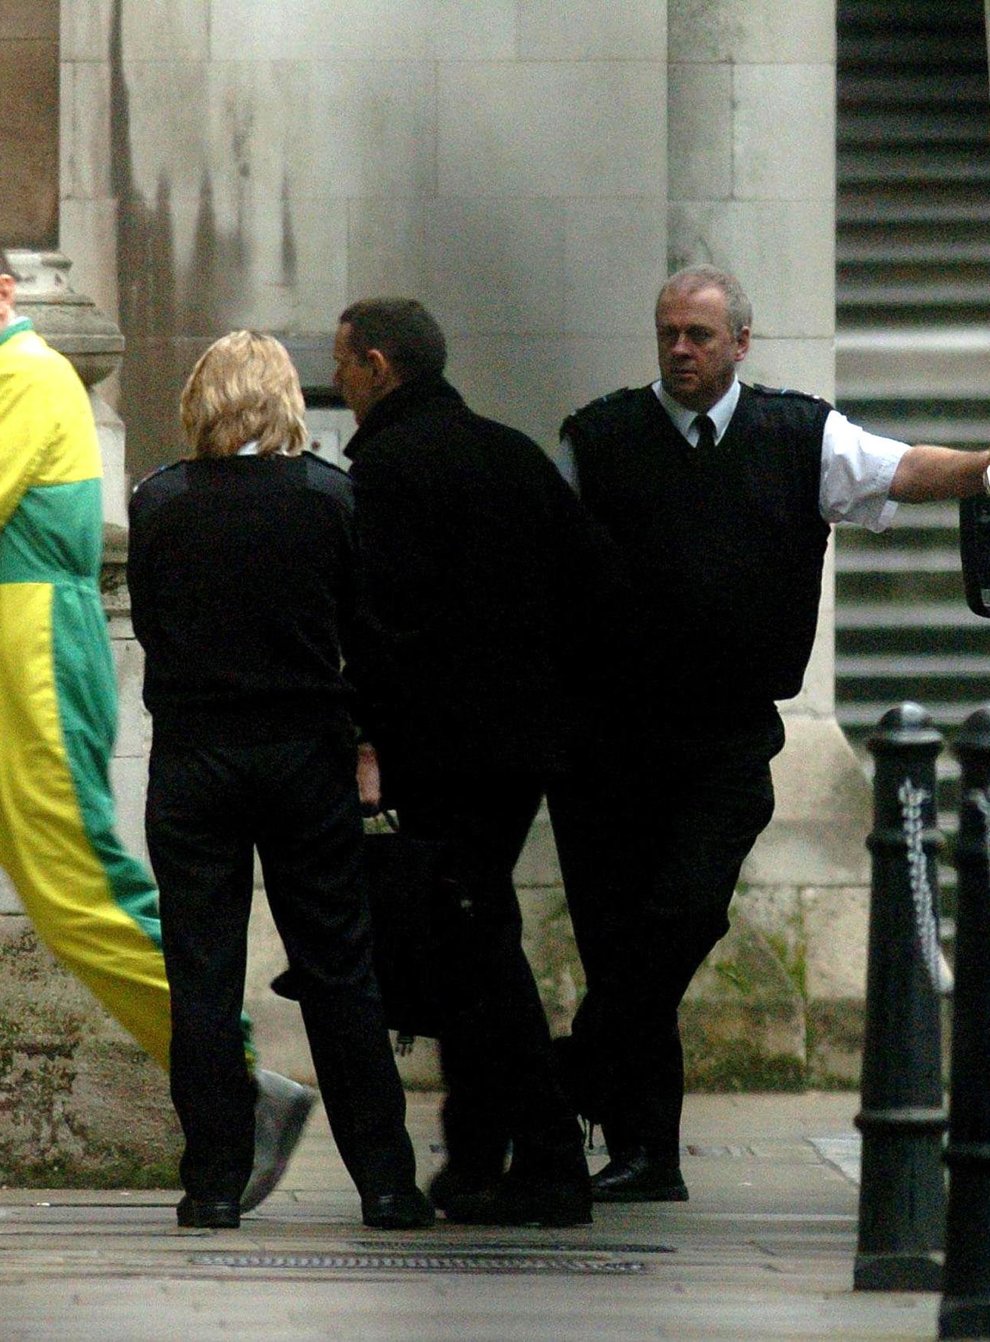 Jack Whomes, then 44, arrives at the Royal Courts of Justice in London in February 2006